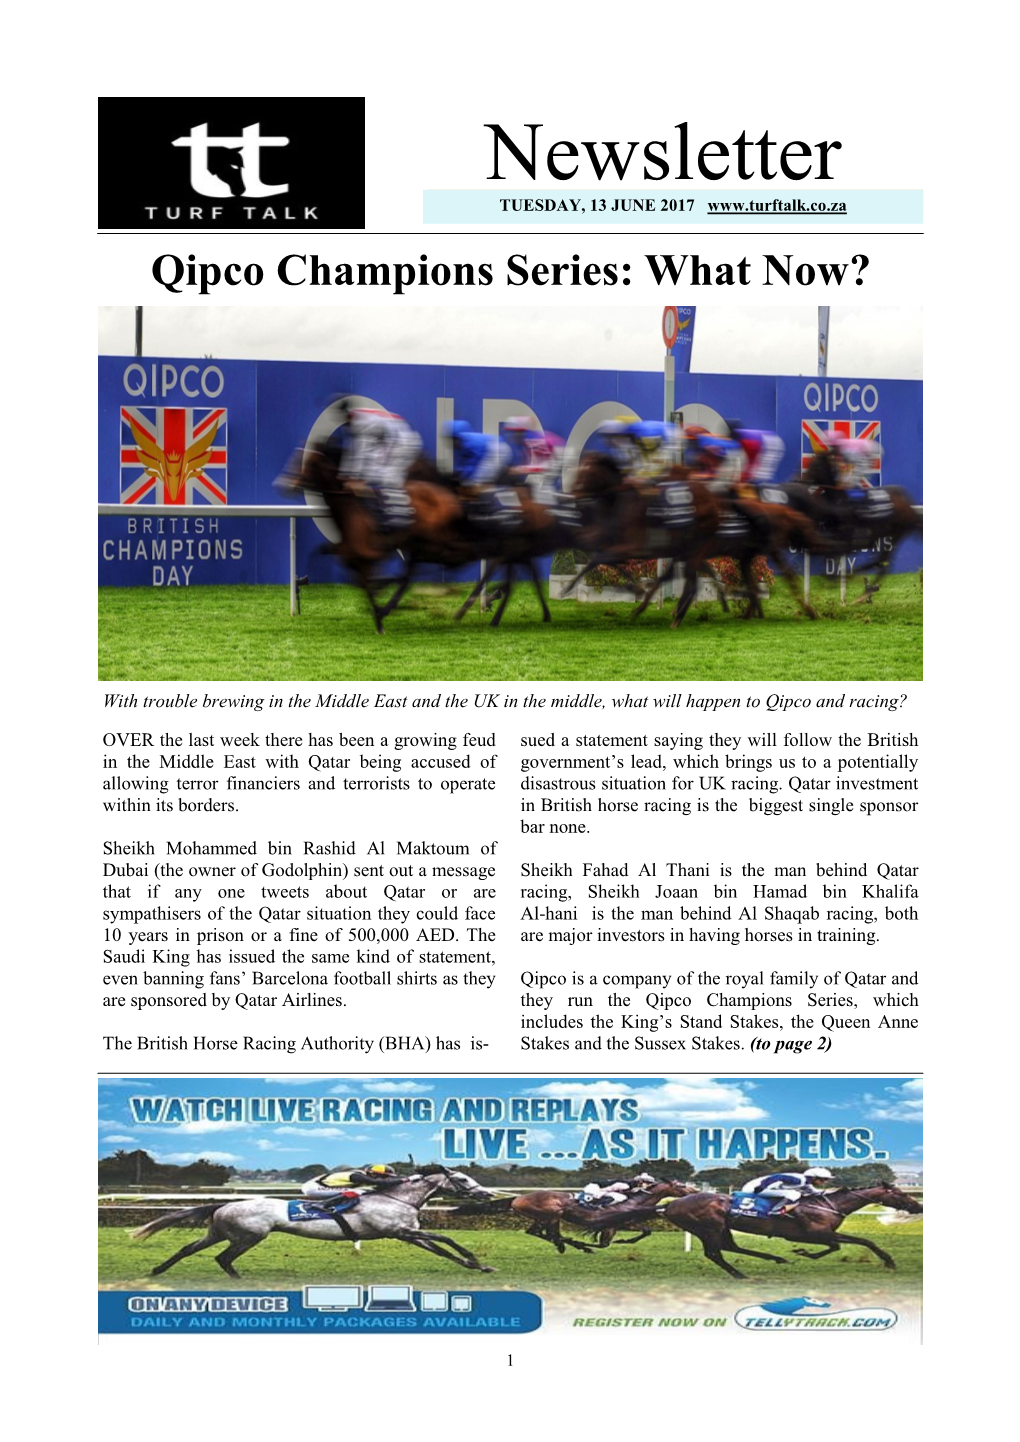 Newsletter THTHURSDAYTUESDAY, 13 JUNE 9 FEBRUARY 2017 2017 Qipco Champions Series: What Now?